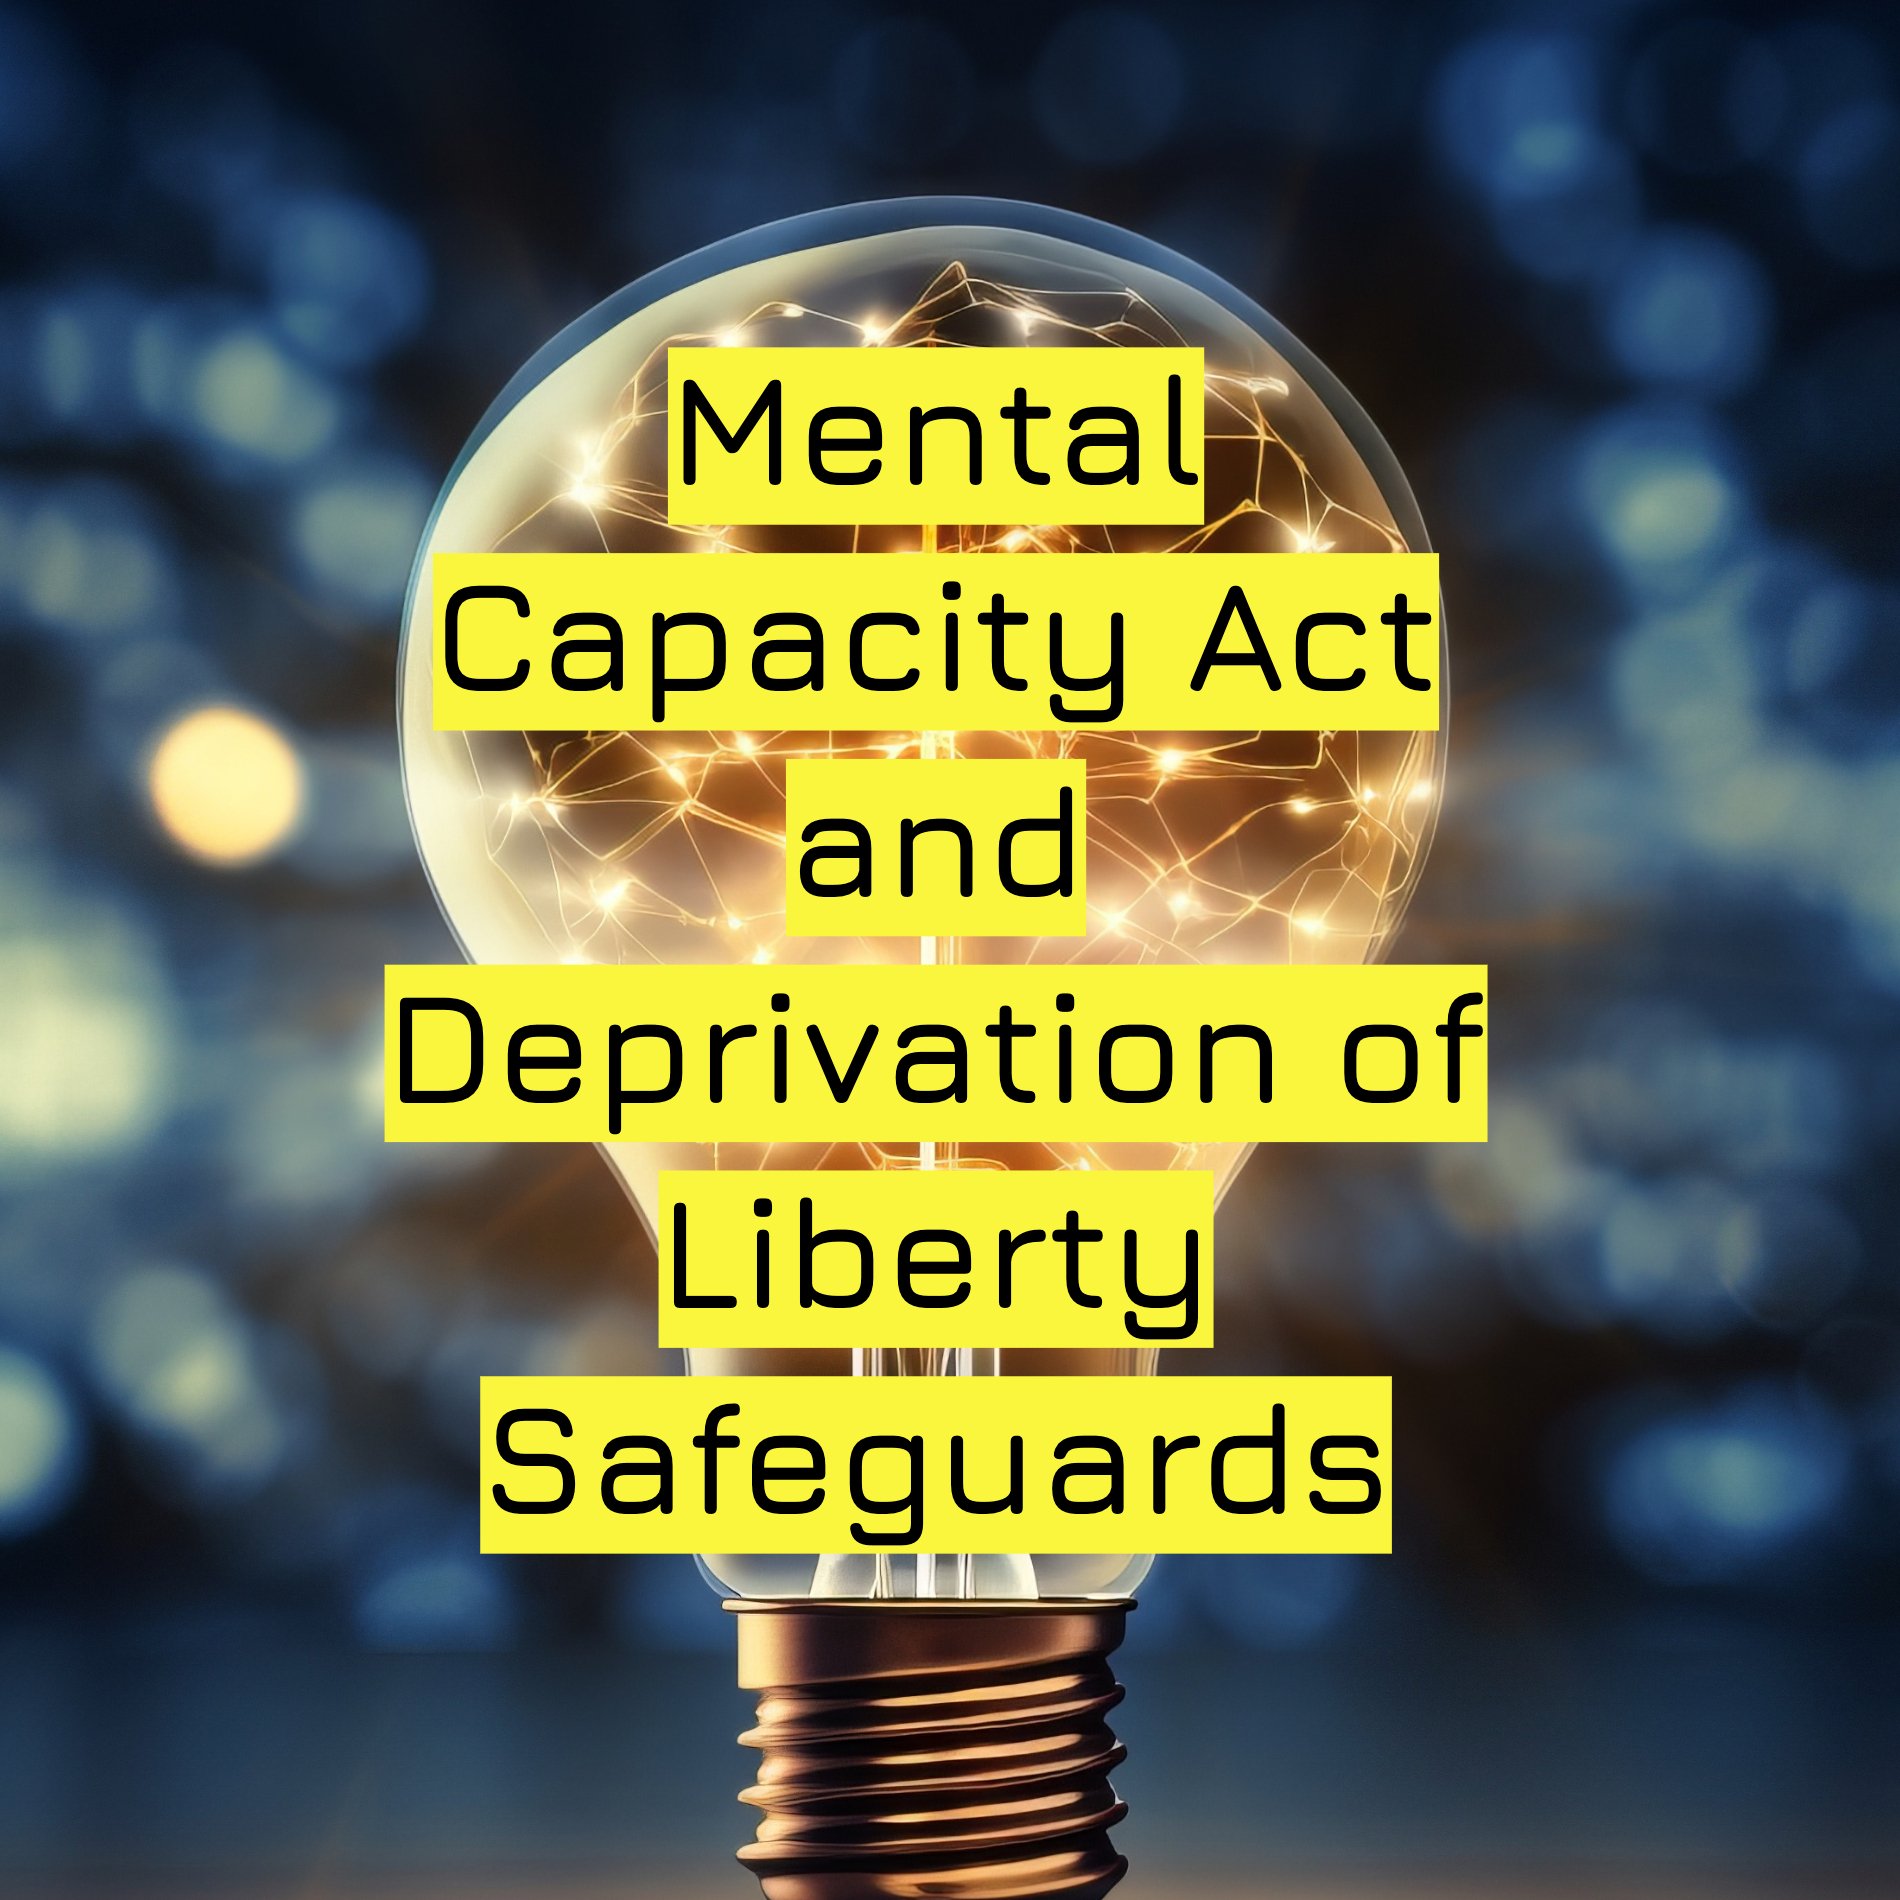 Mental Capacity Act and Deprivation of Liberty Safeguards .jpg